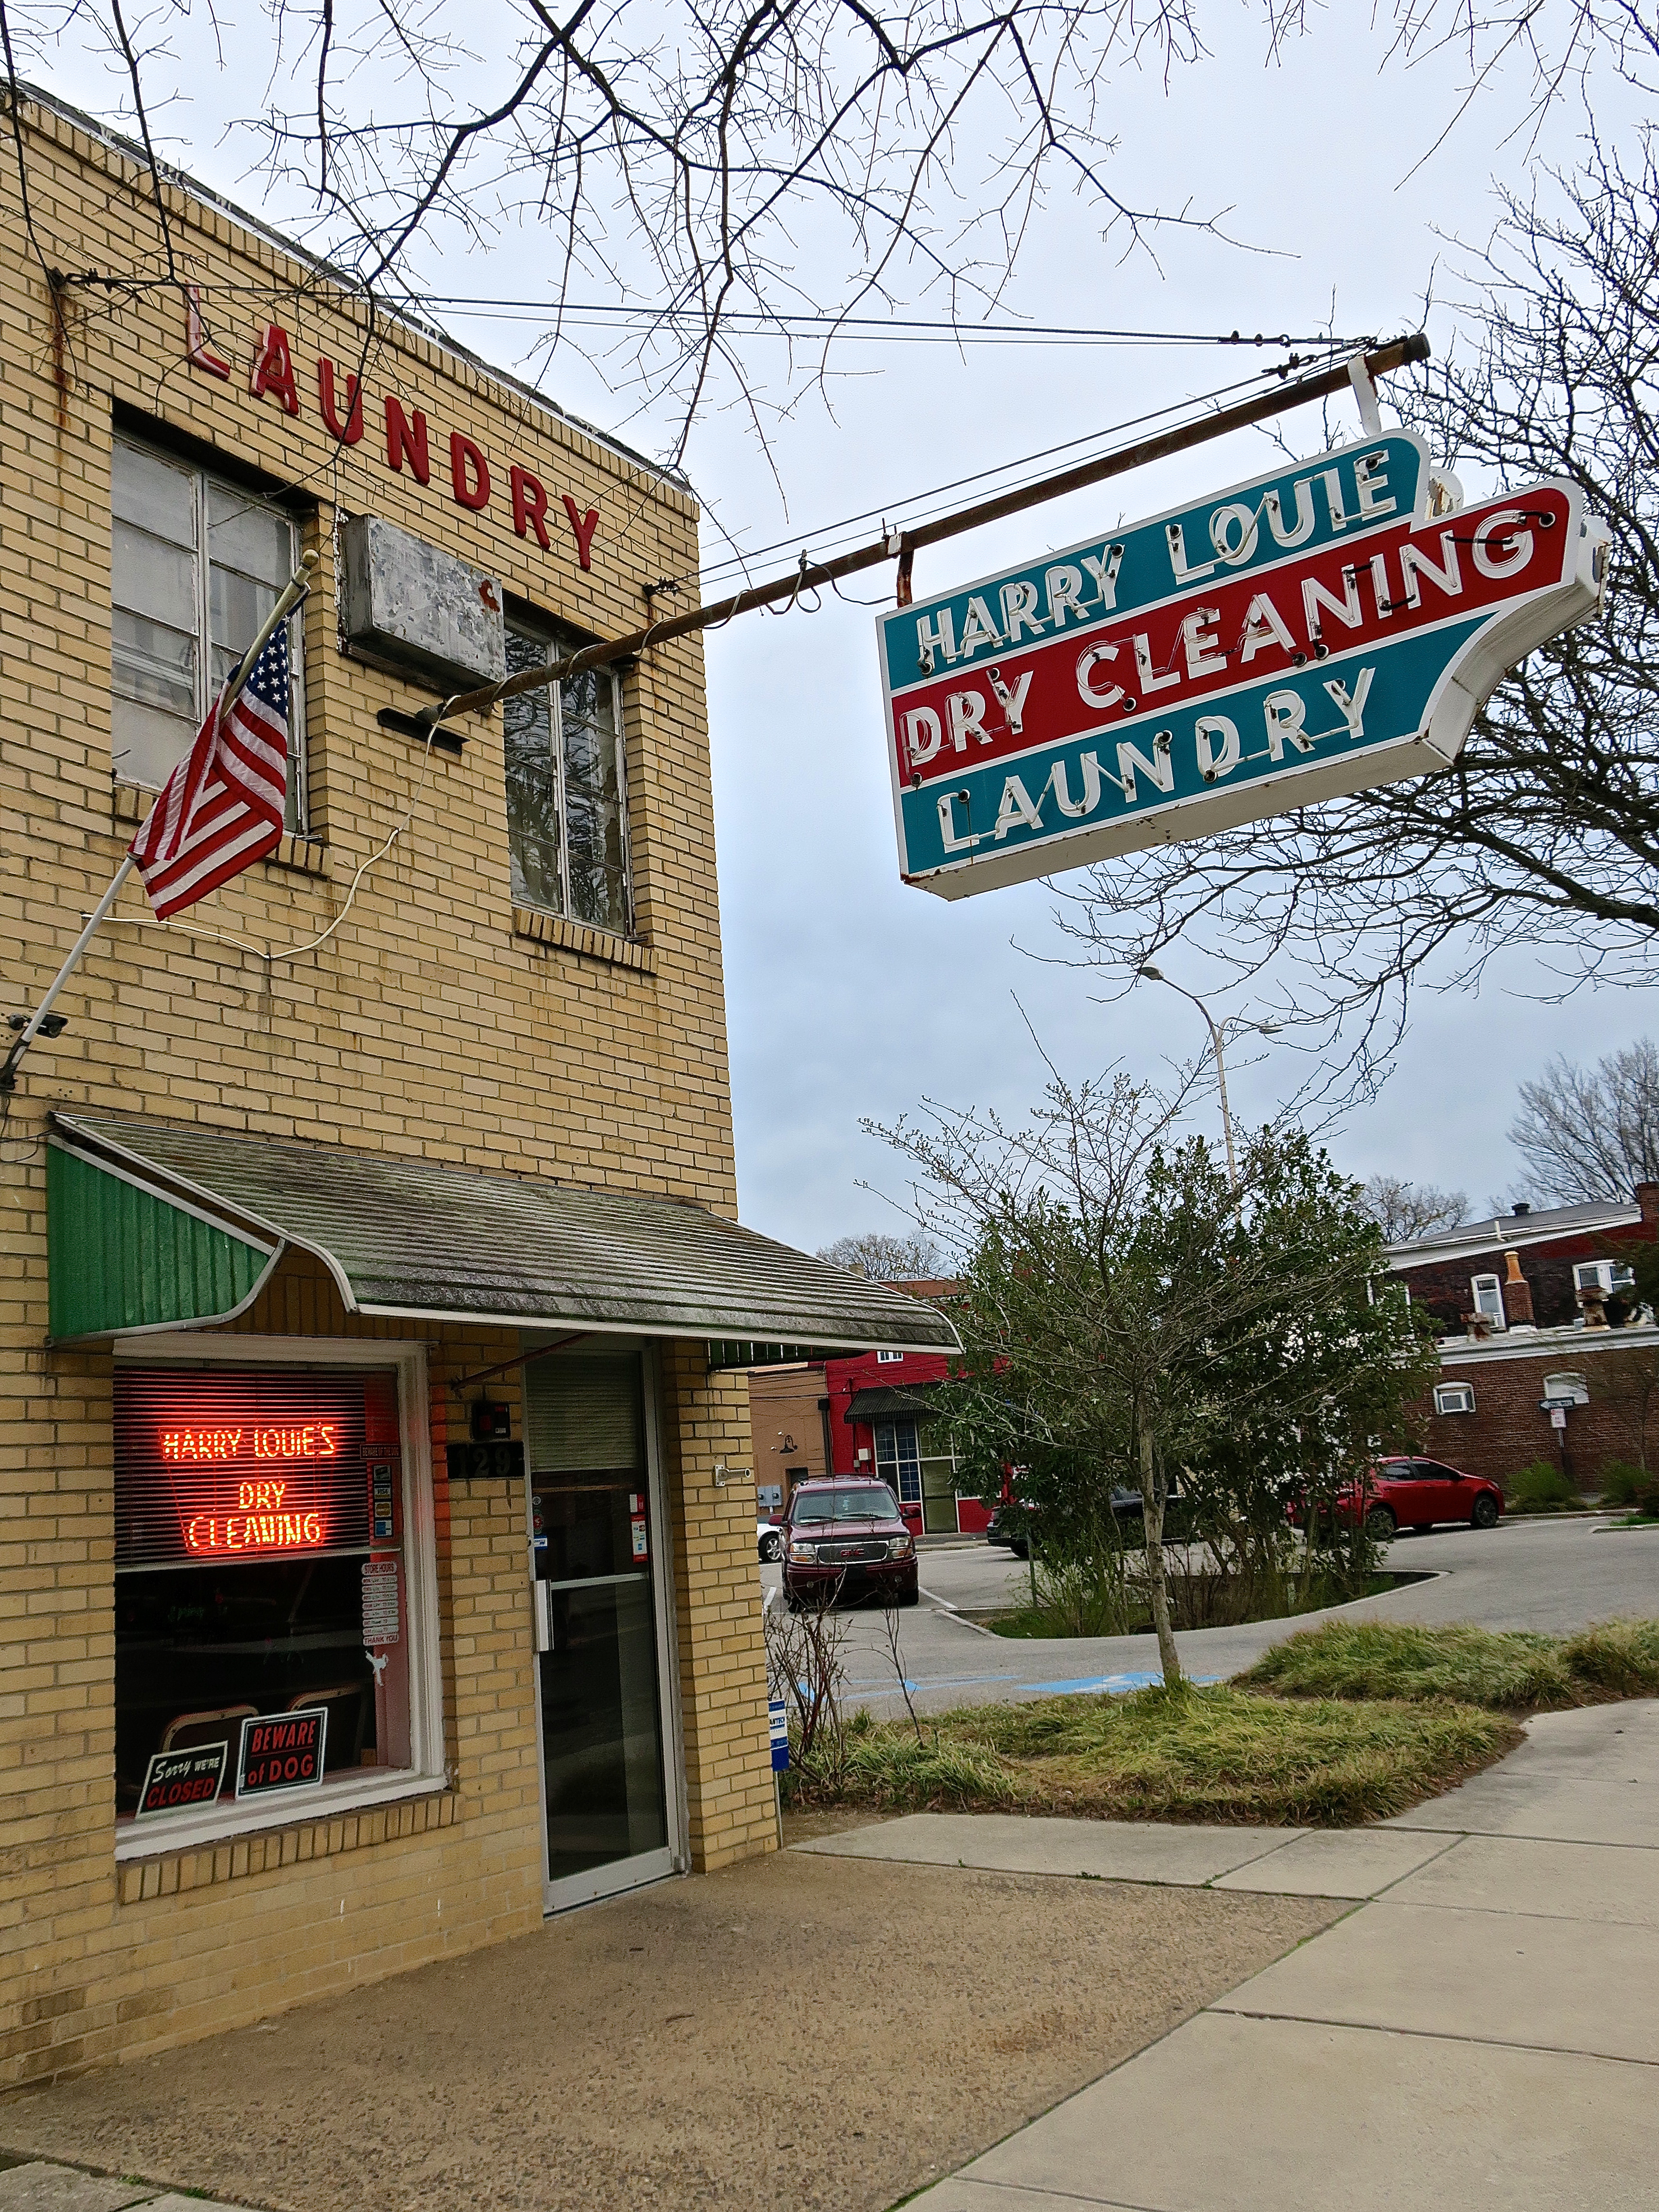 Harry Louie Laundry and Dry Cleaning - 129 South Governors Avenue, Dover, Delaware U.S.A. - April 5, 2017